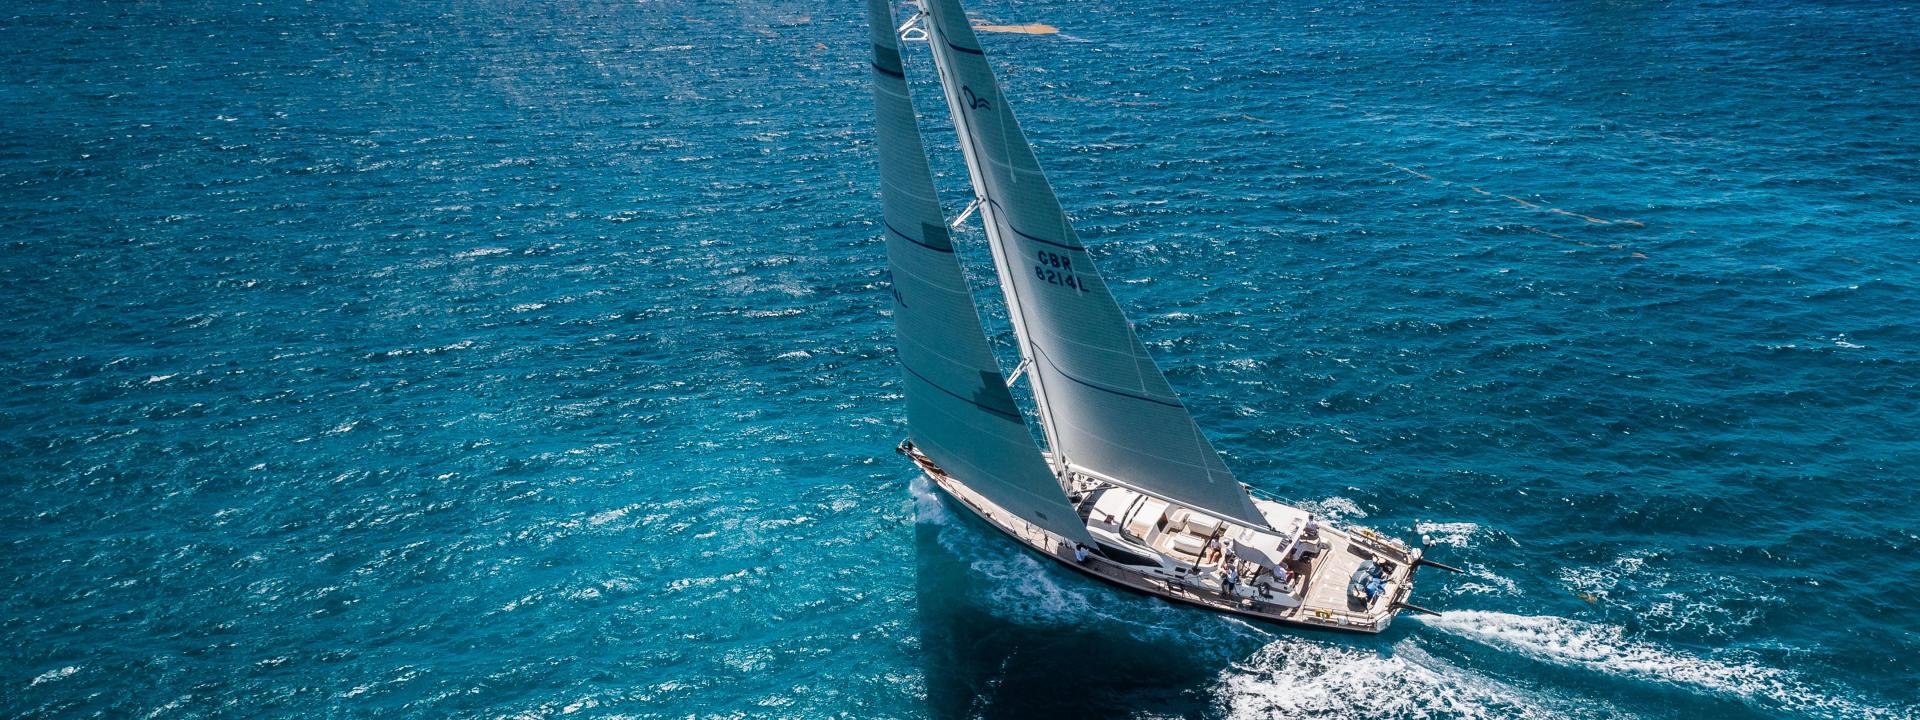 Bluwater Sailing Yacht Oyster Heritage D v41